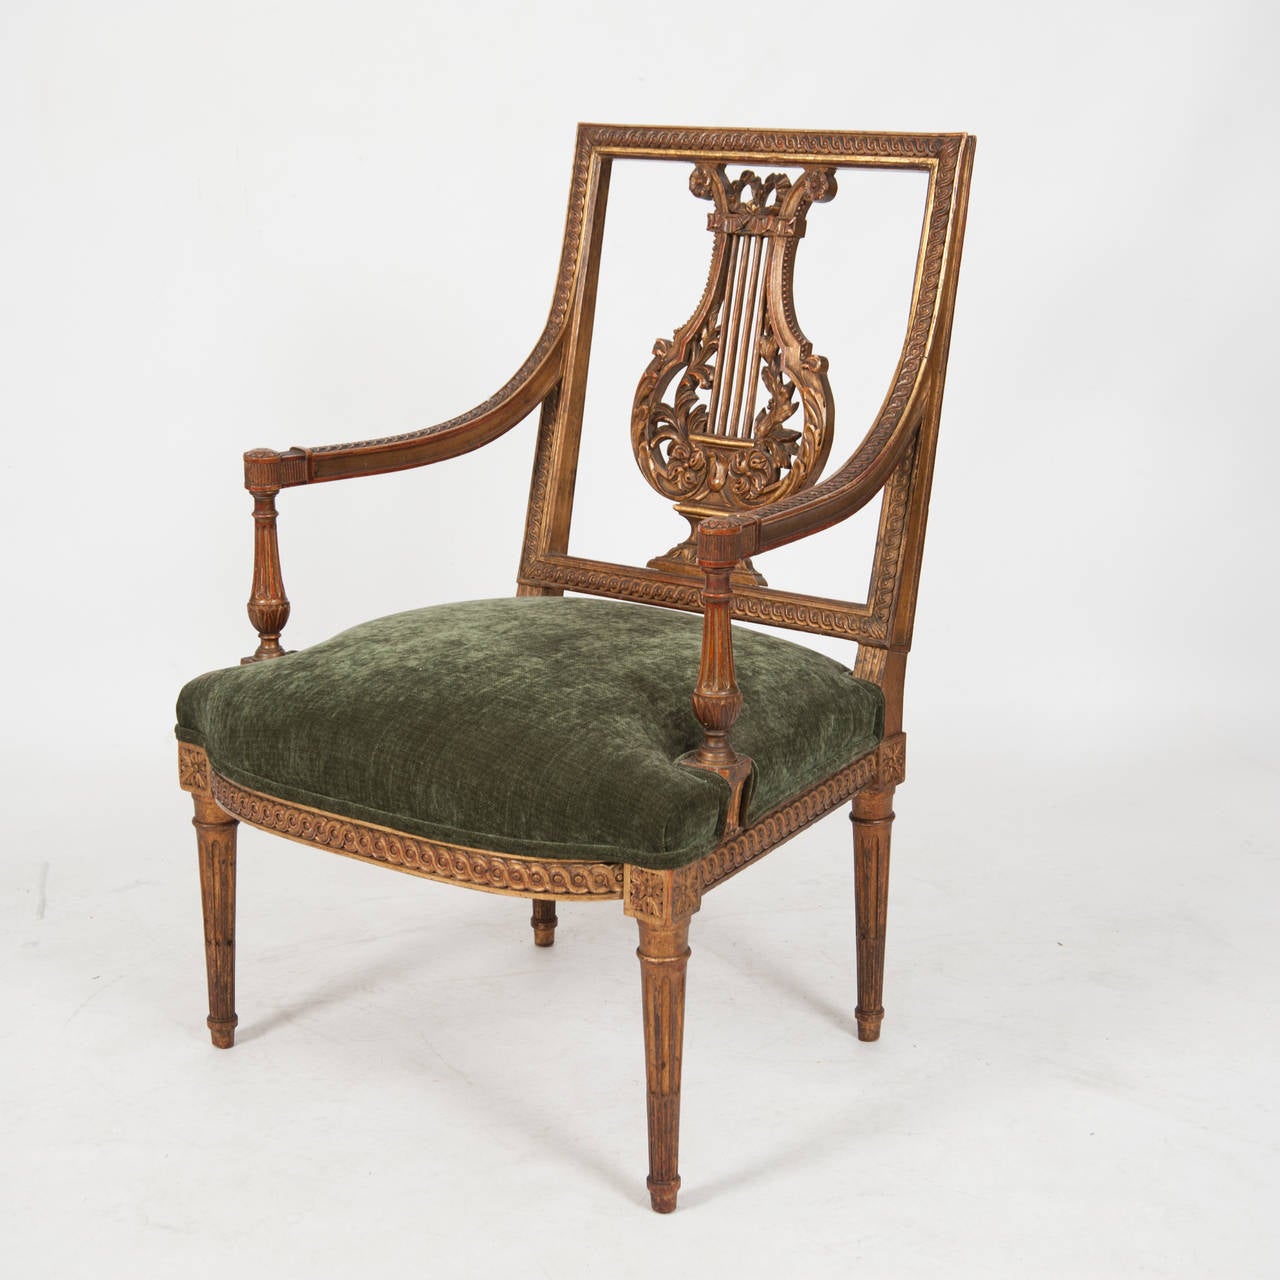 A superb pair of French finely carved LXVI style armchairs with a Lyre splat back in deep bronze green and parcel gilt, circa 1870. Measures: H 885, L 580, D 540.